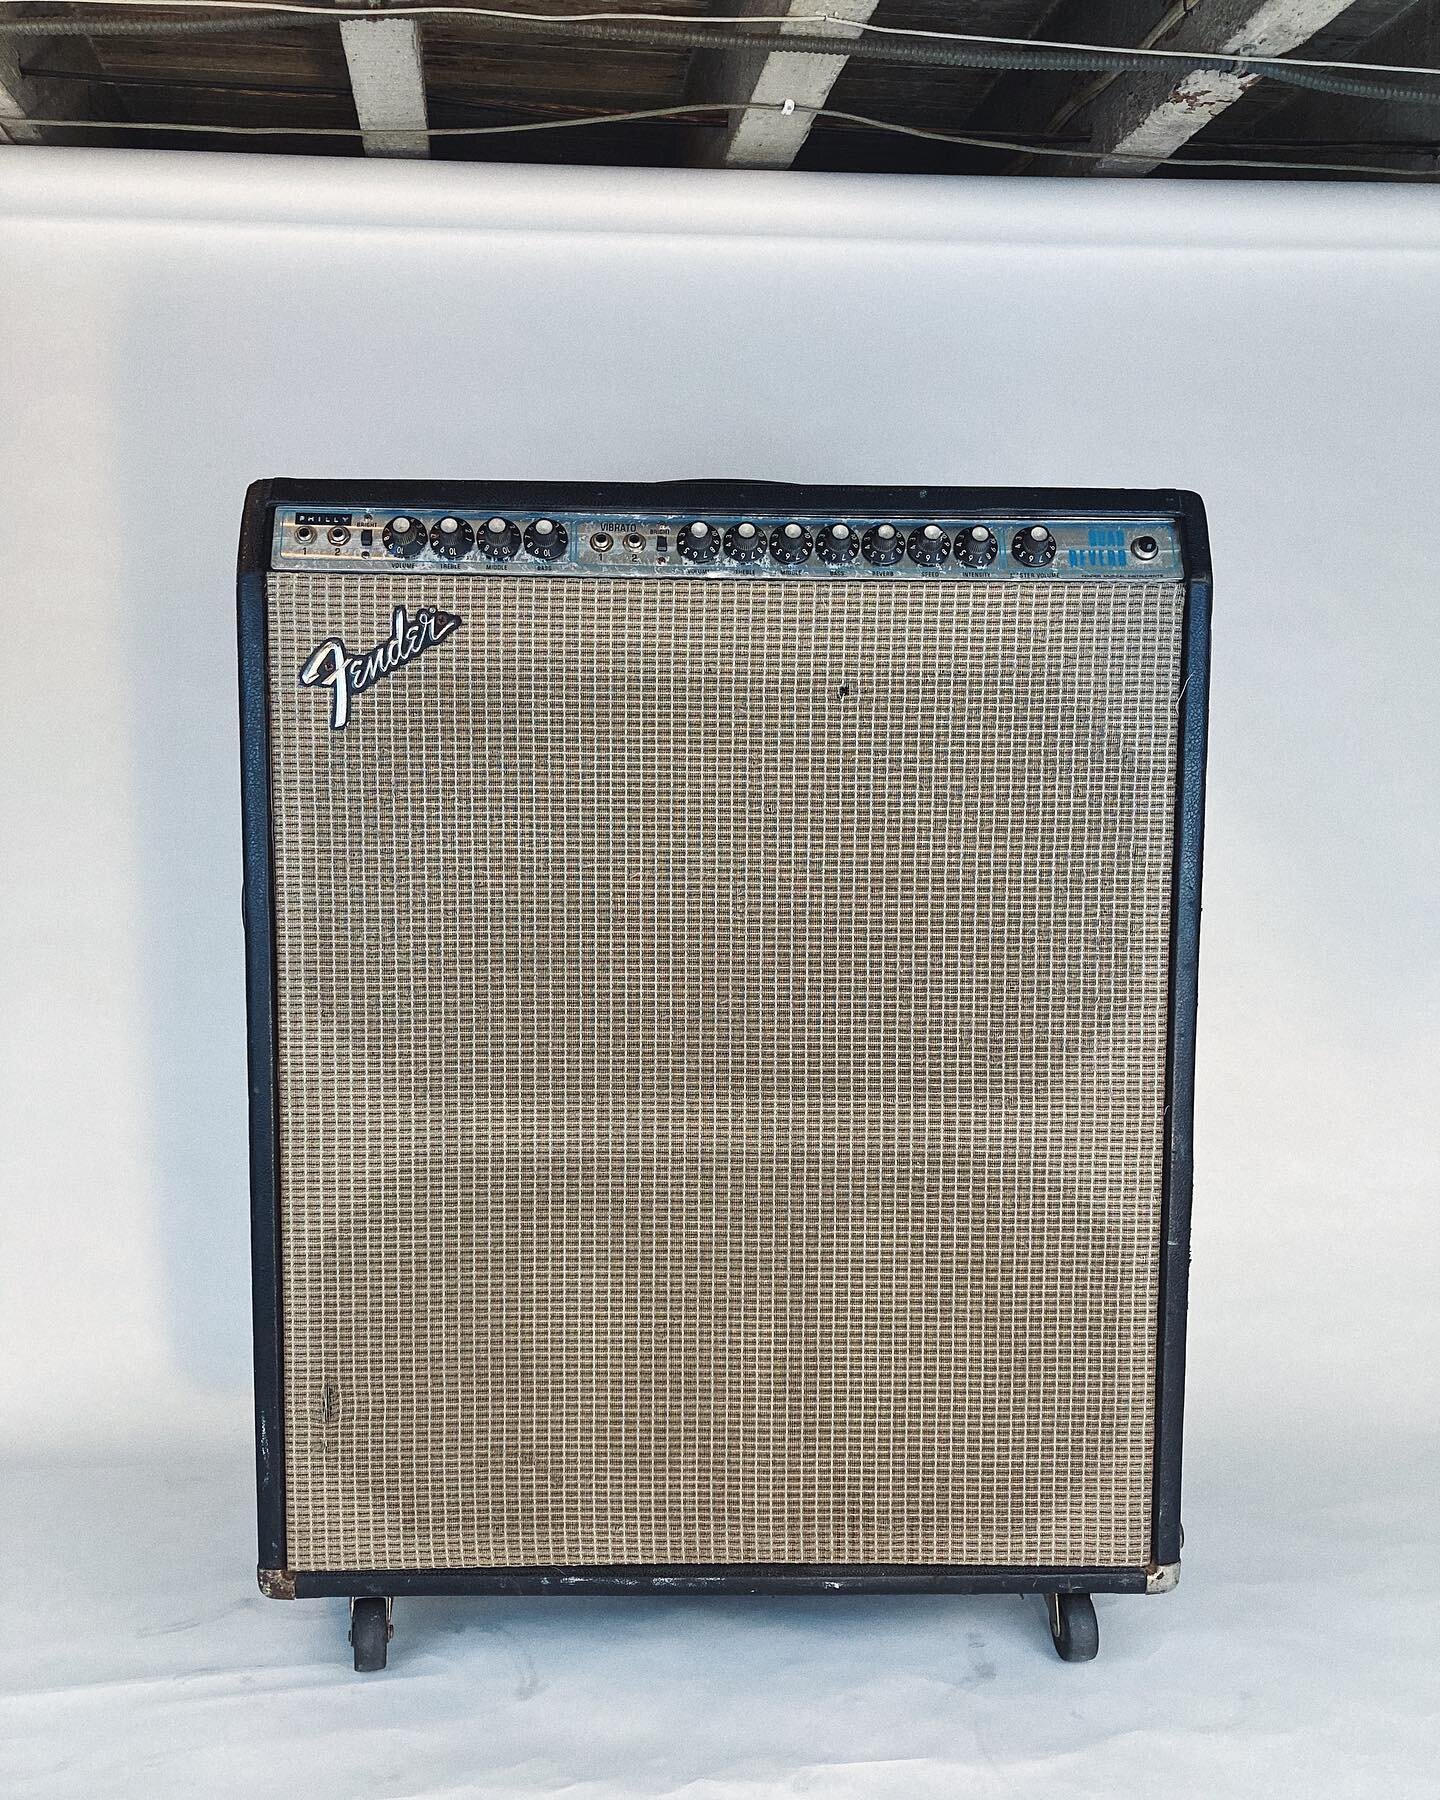 This Quad Reverb came in tired and was less-than-inspiring to play. The owner had always wanted one of these (quad reverb), but they wanted it to do more. We discussed some options//mods and I got to work. 
Aside from the usual stuff: replacing some 